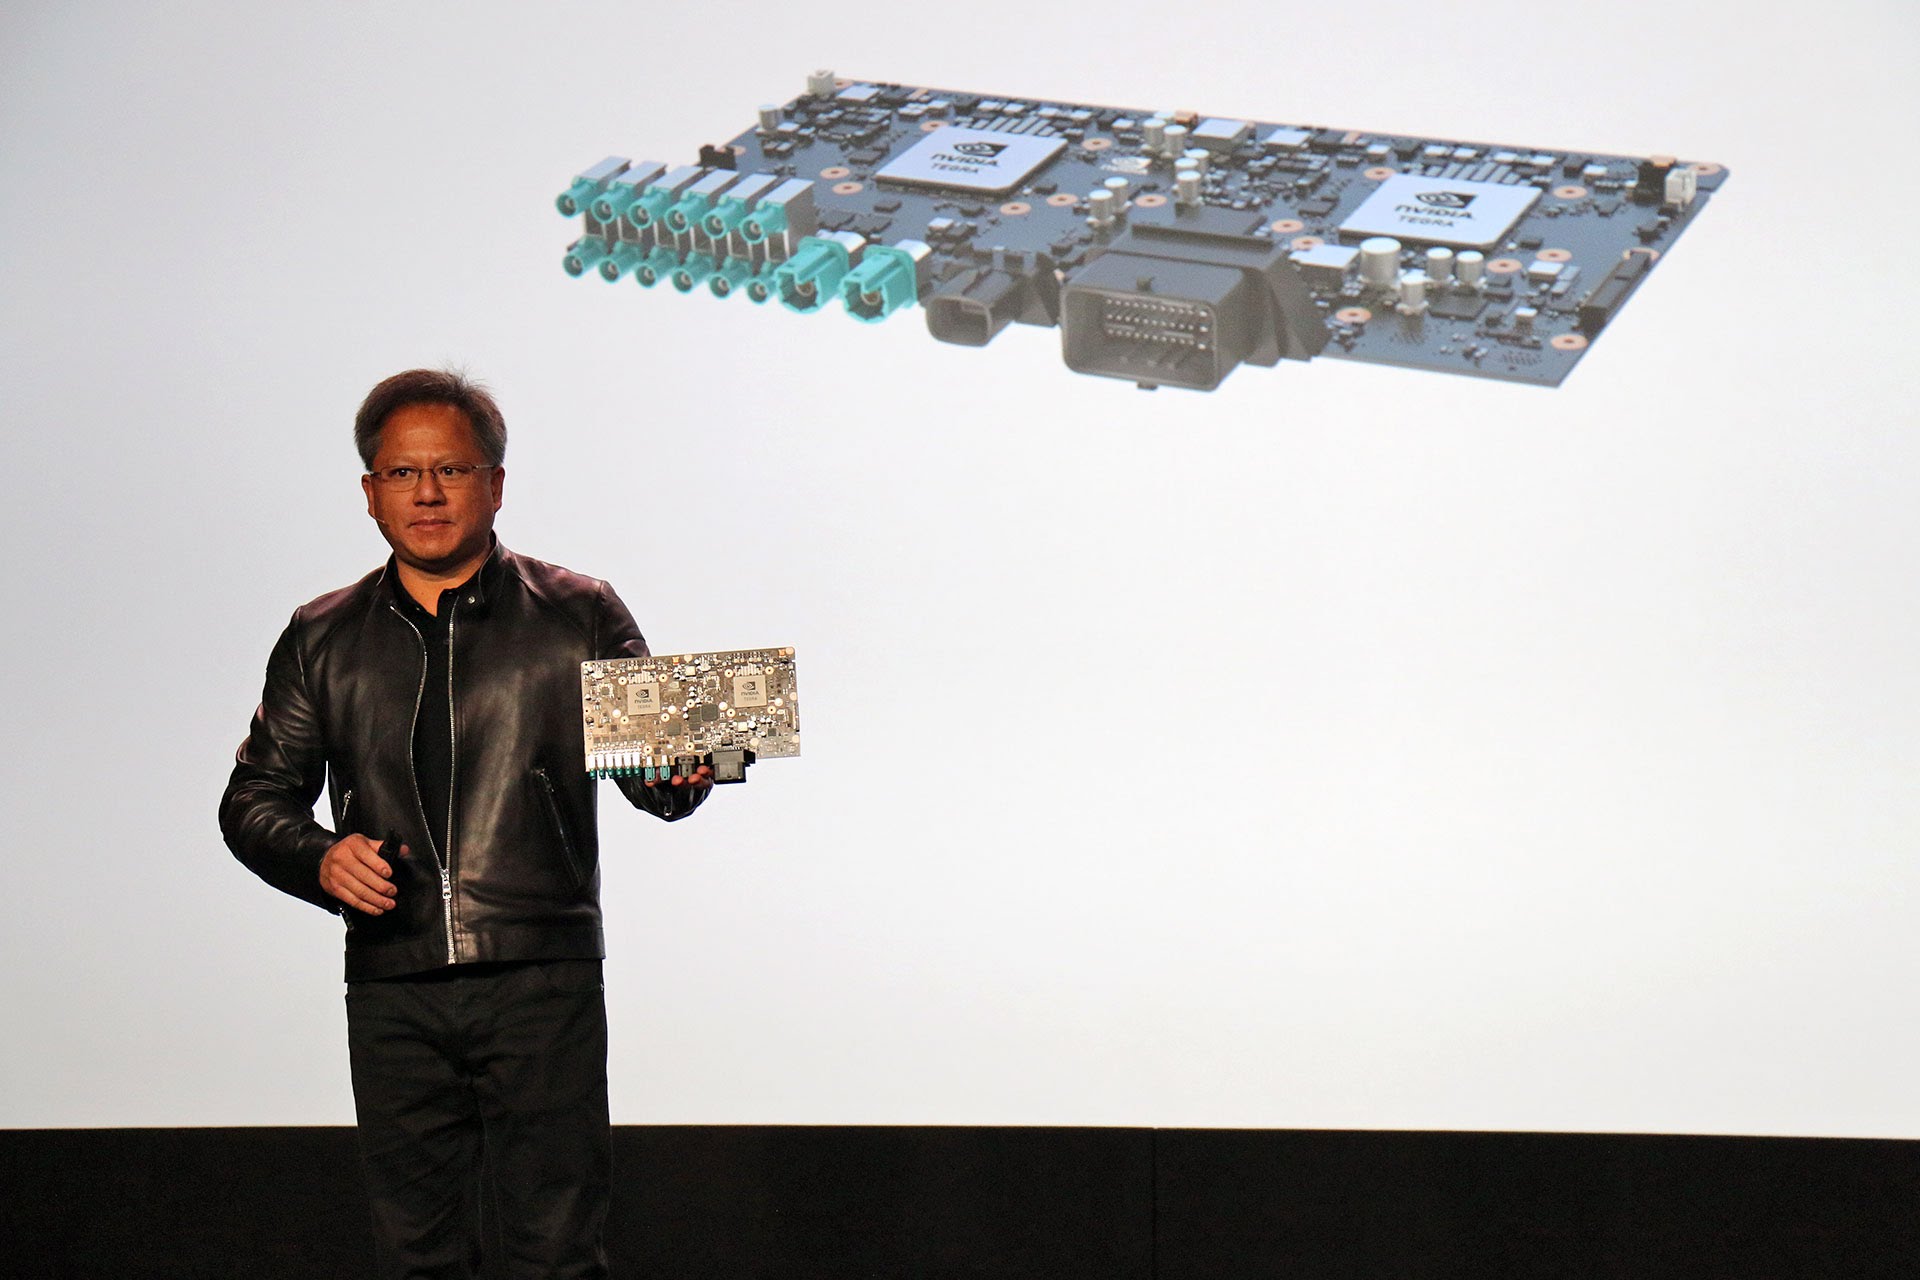 Huang with the Drive PX2 that is said to house dual GP105 chips